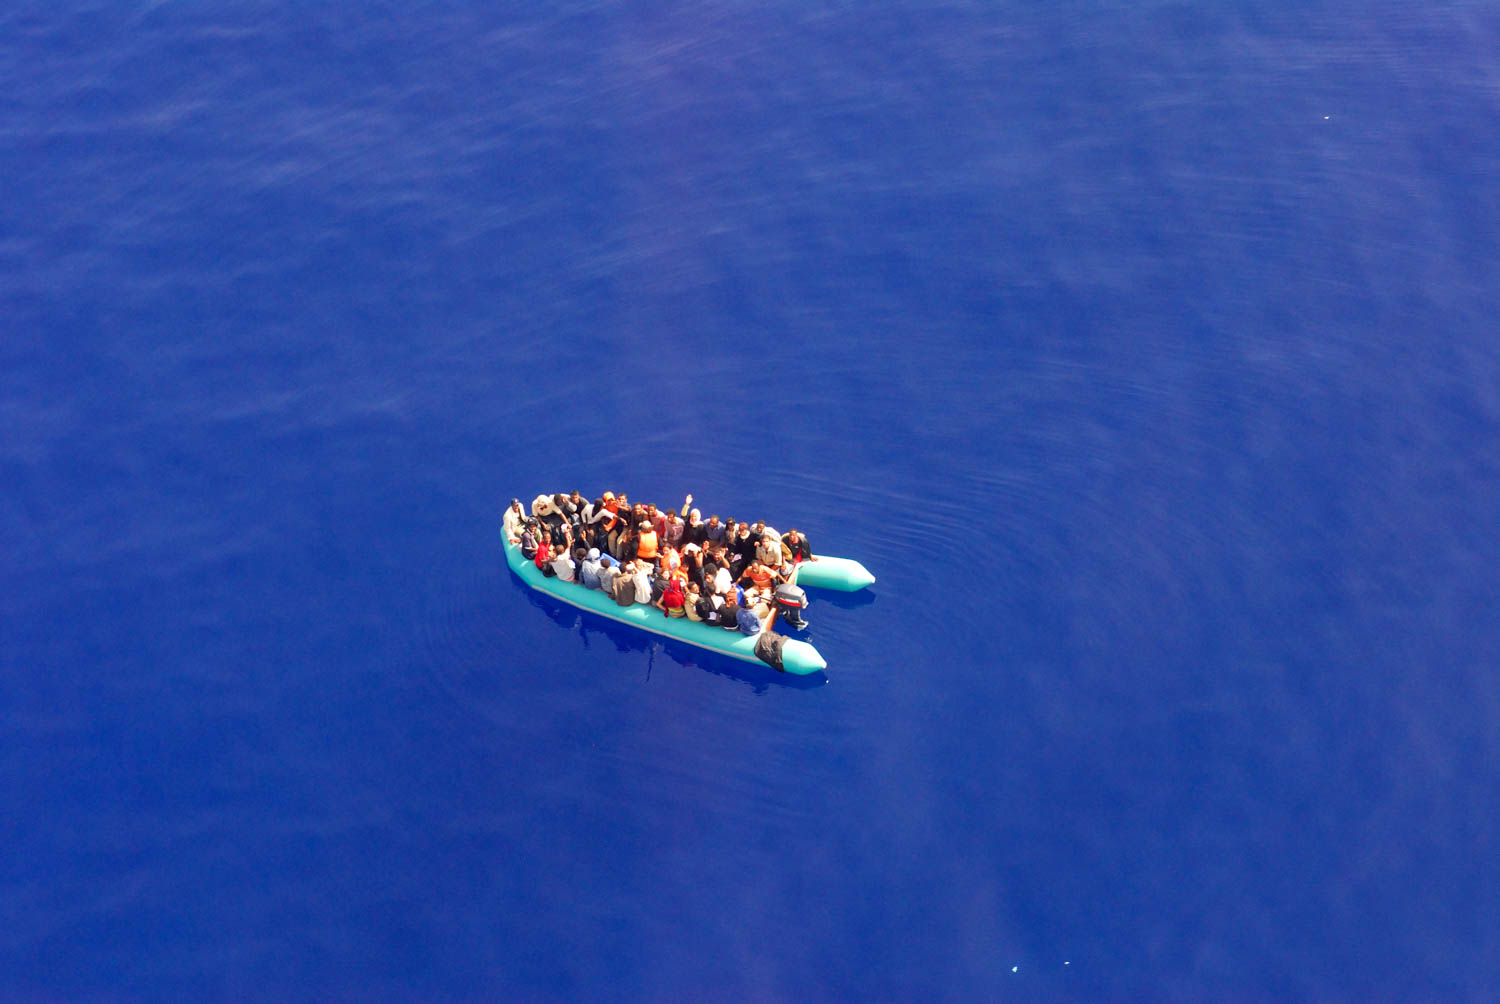 Sicily - Illegal Immigration - View of a small immigrant vessel 